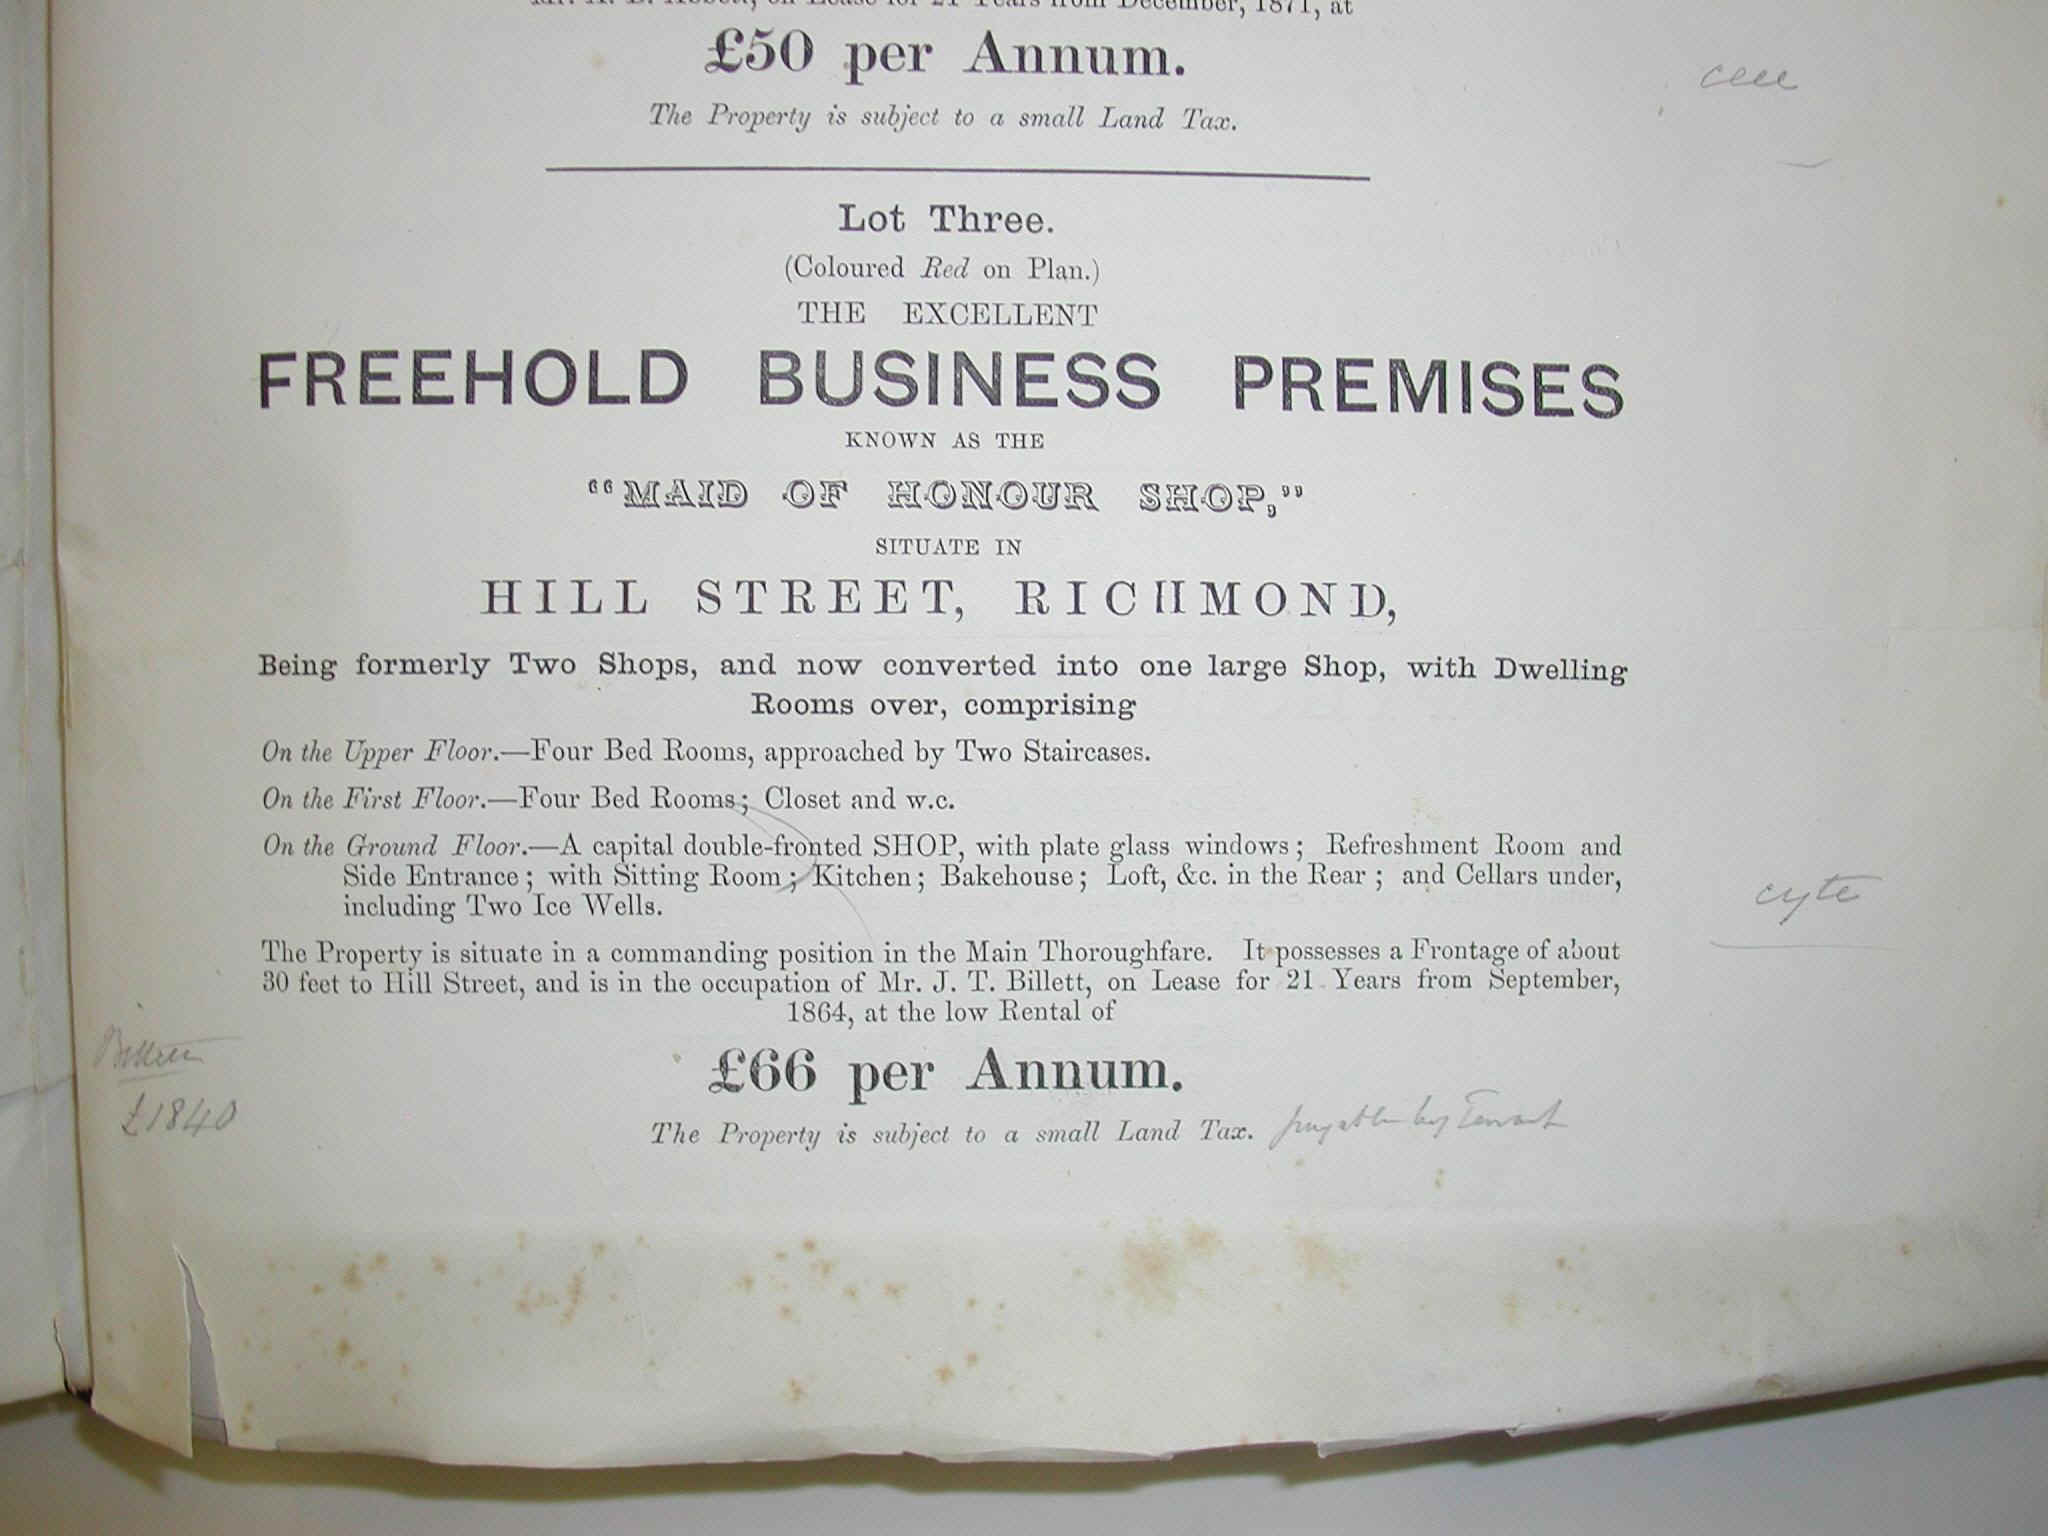 Maid of Honour shop text from the sale catalogue, 1877.